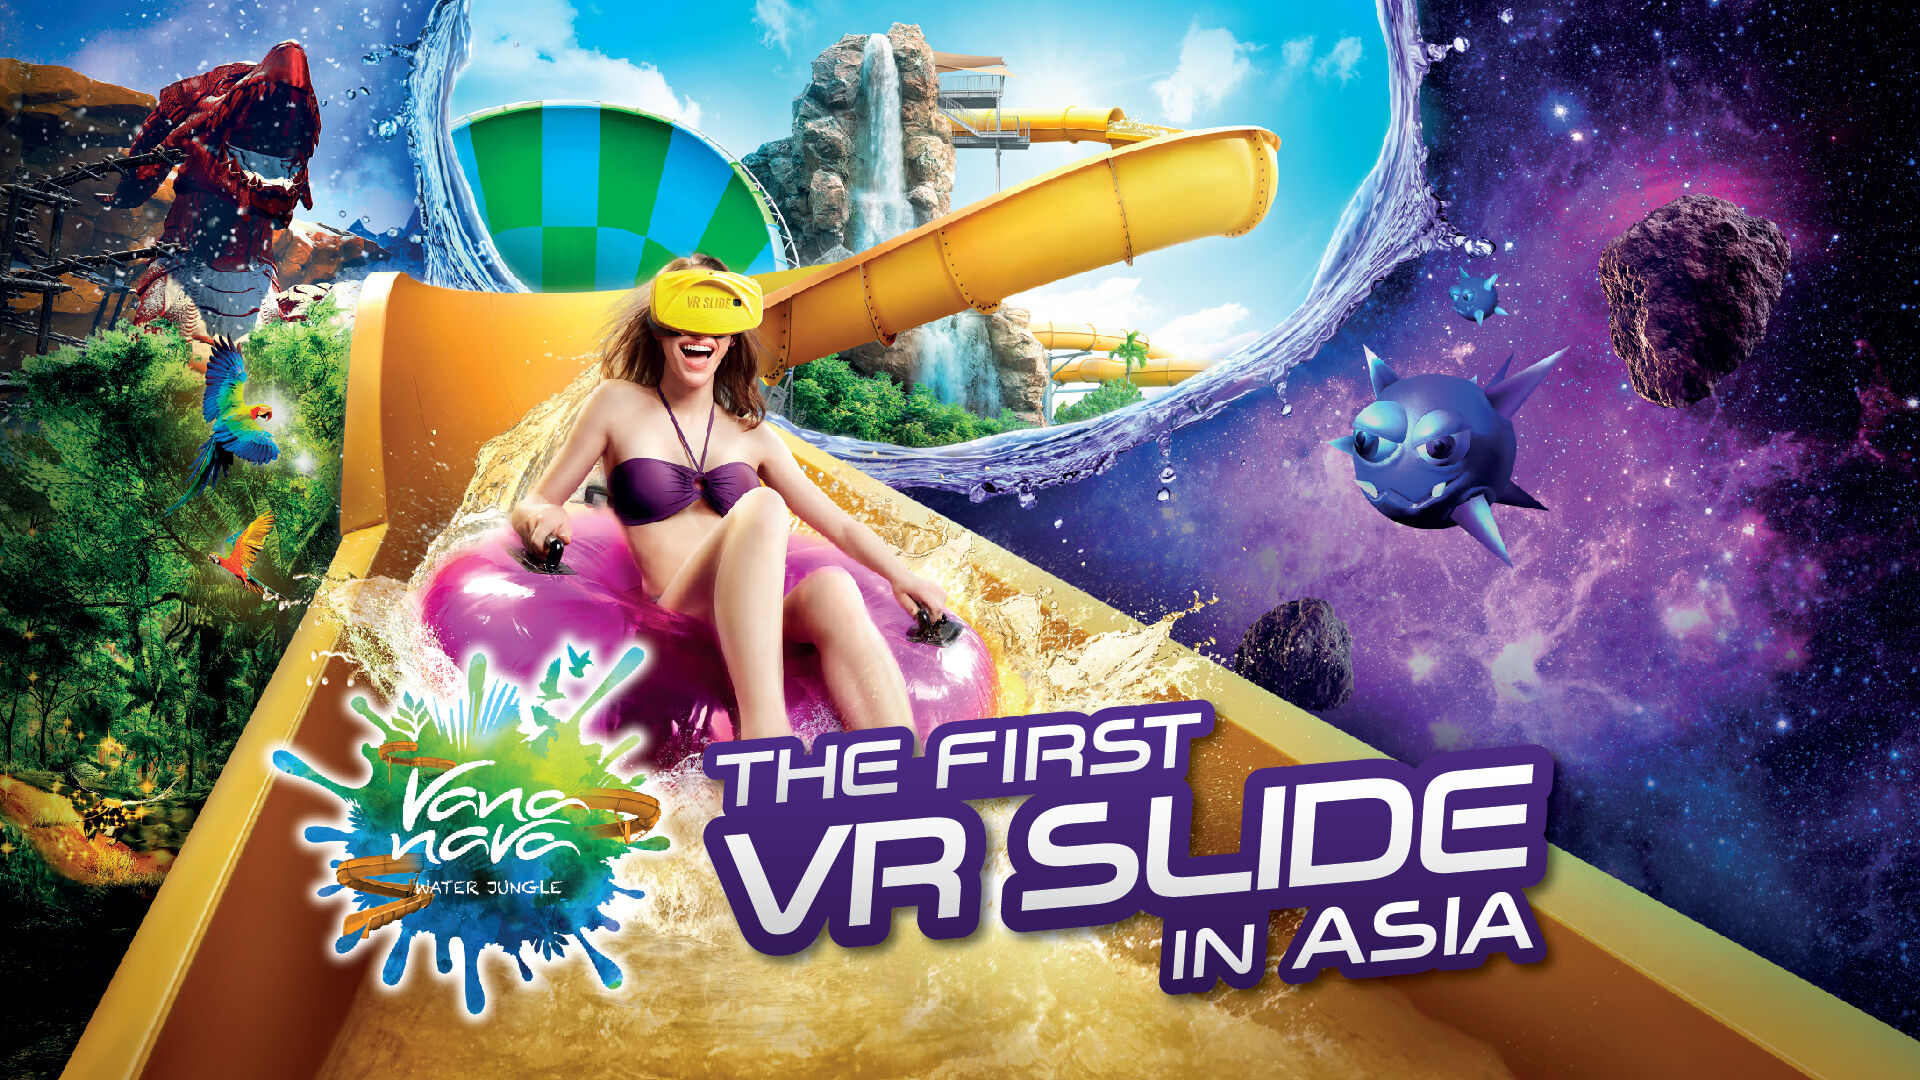 Vana Nava Hua Hin opens thrilling new zones and Asia’s first VR Water Slide | News by Thaiger